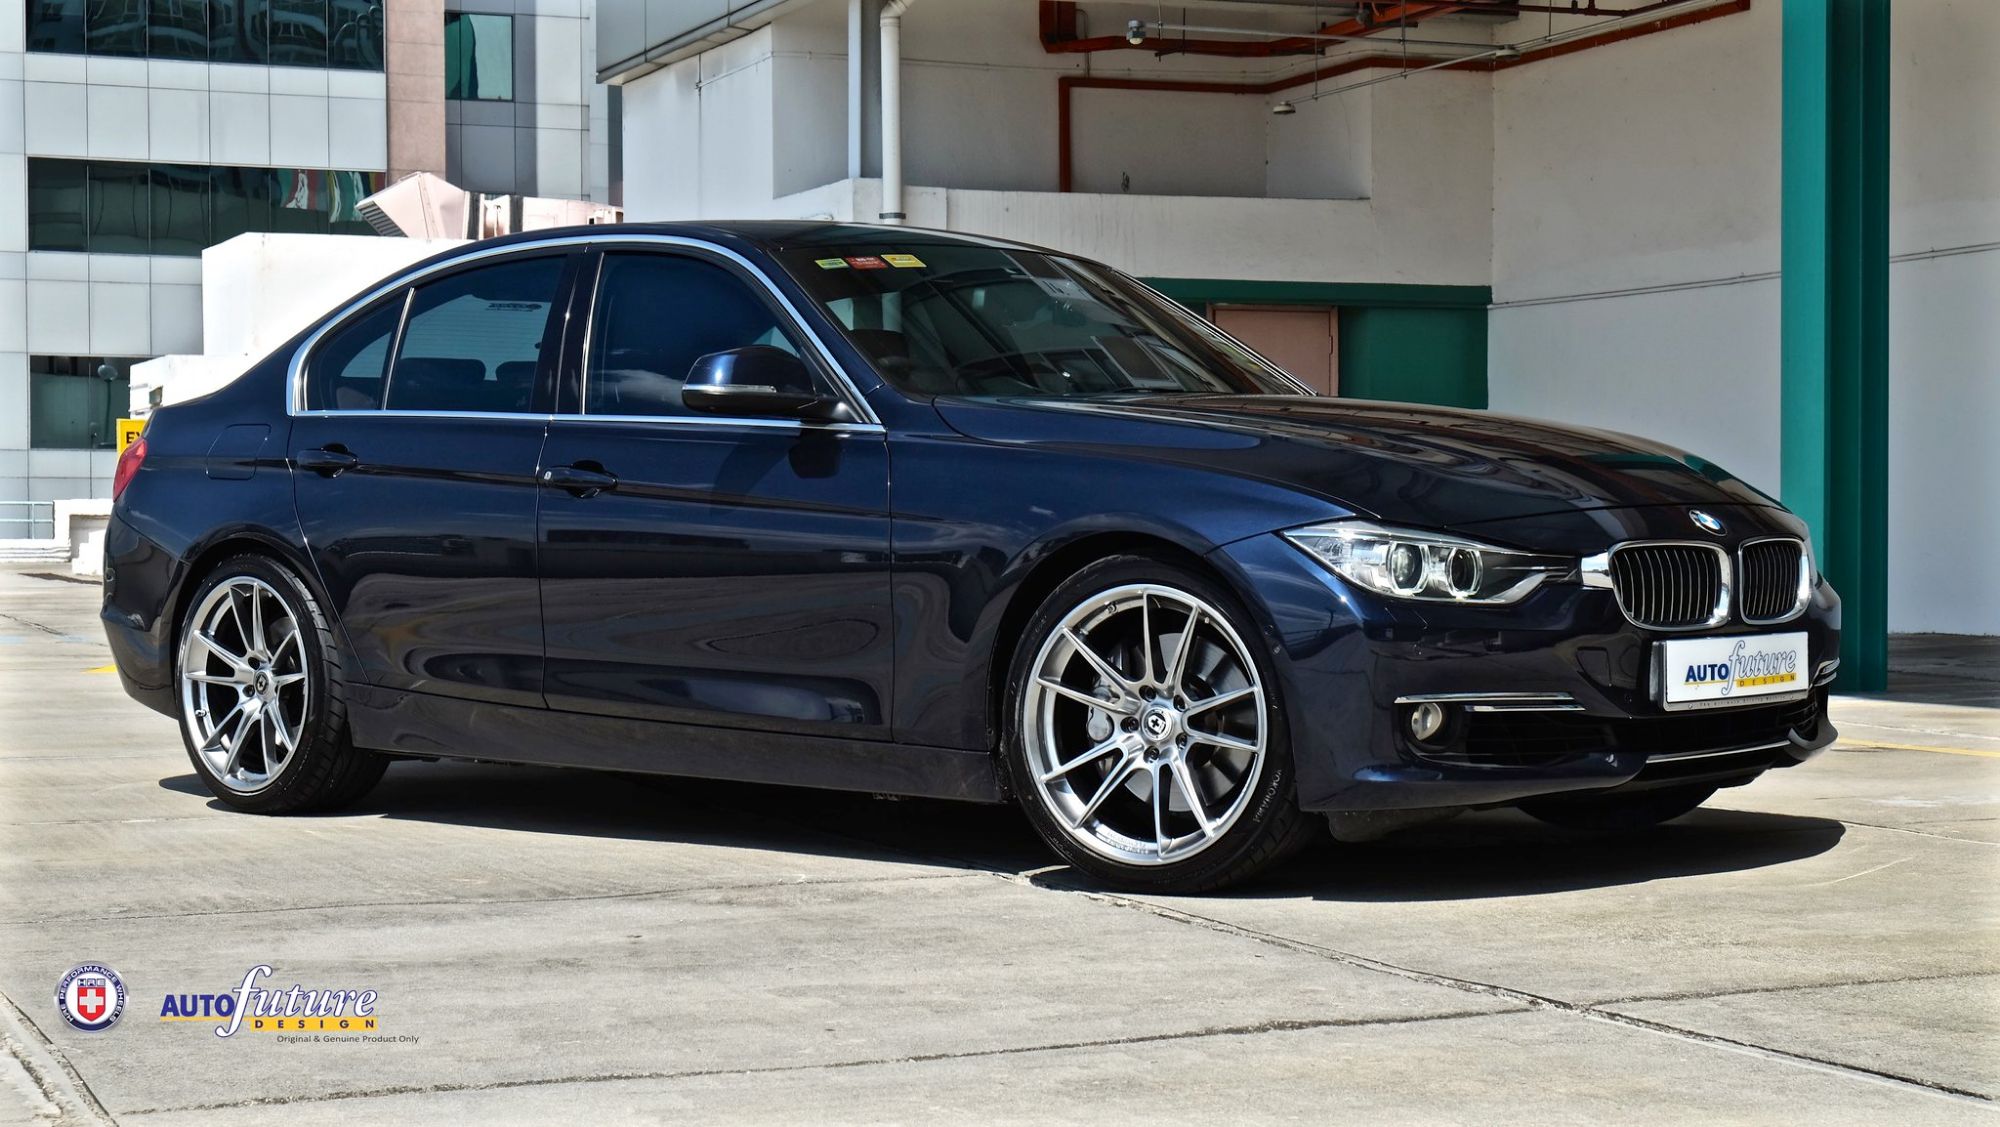 BMW 3 series 335i F30 Blue with HRE FF04 Aftermarket